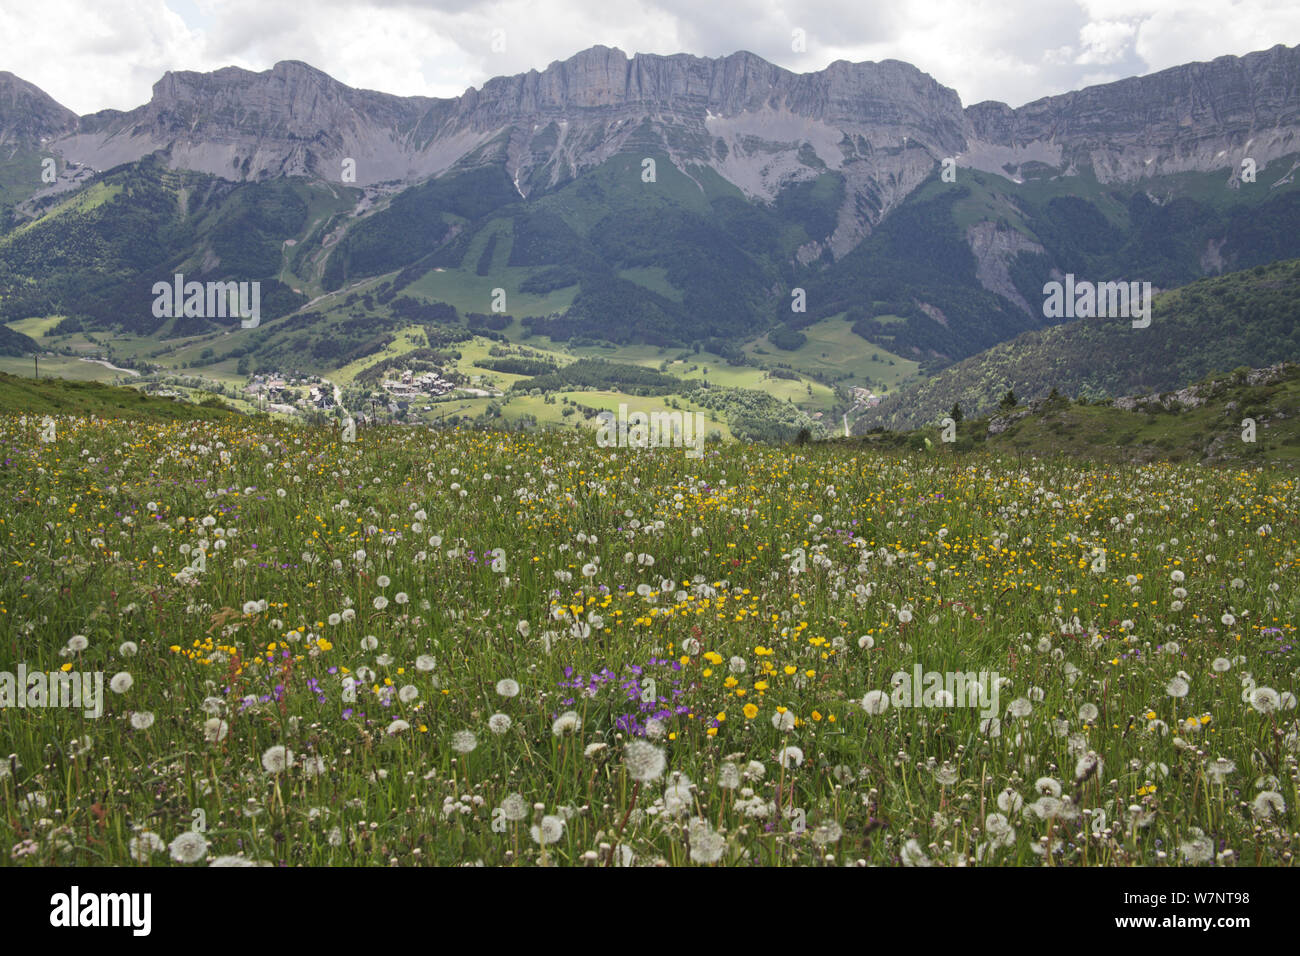 View of wildflower meadow with the Grand Veymont ridge beyond from the Pas du Serpaton, Parc Naturel Regional du Vercors, France, June 2012. Stock Photo